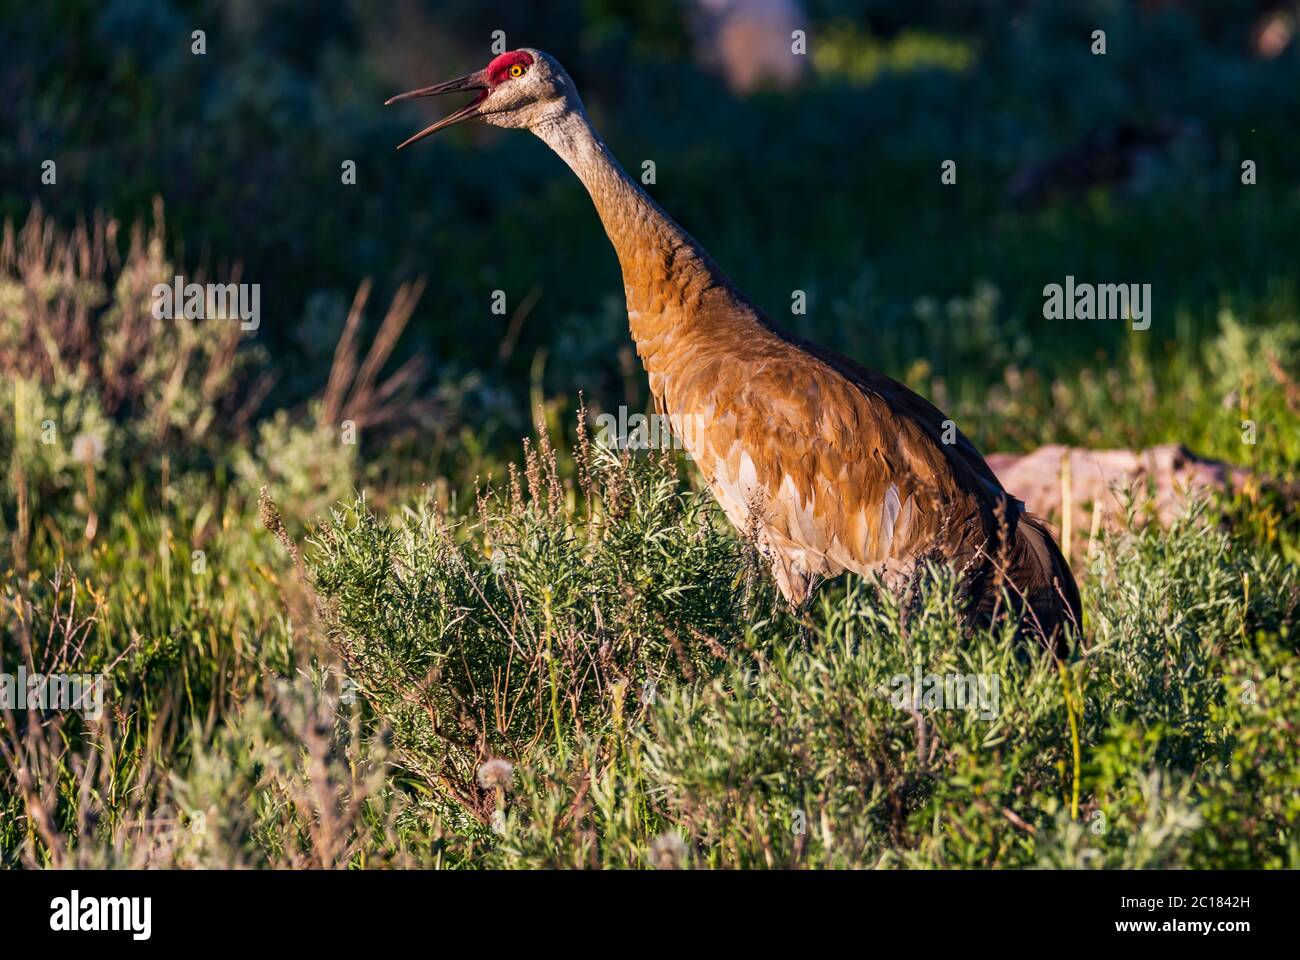 A Sandhill Crane (Grus canadensis) lets out a call in the late-afternoon sun in the Timber Lakes area near Heber City, Wasatch County, Utah, USA. Stock Photo